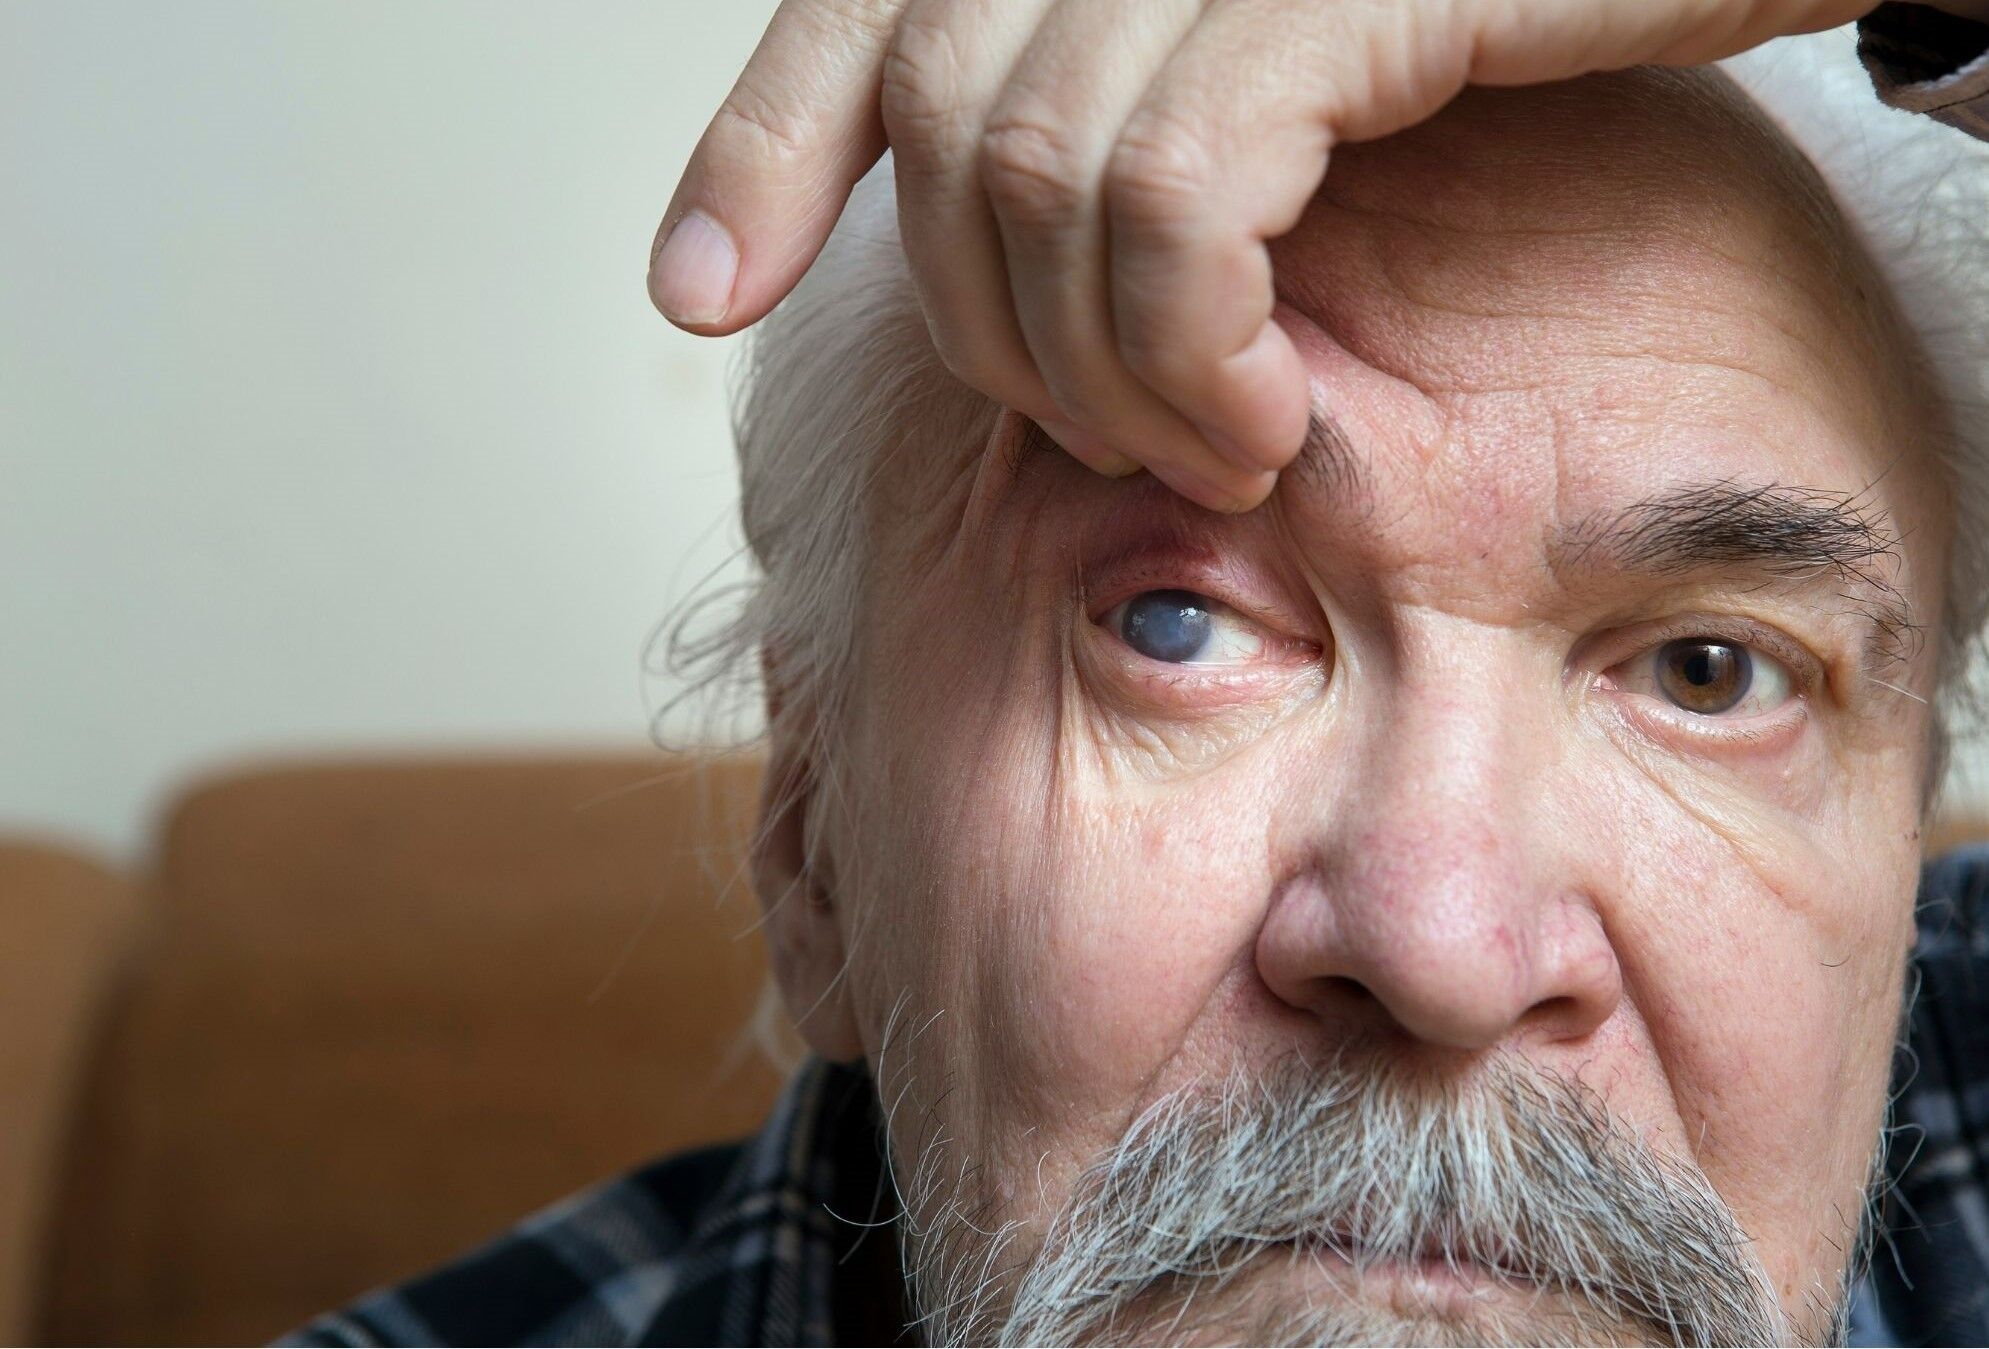 Old man holding up an eyelid showing an eye with cataracts